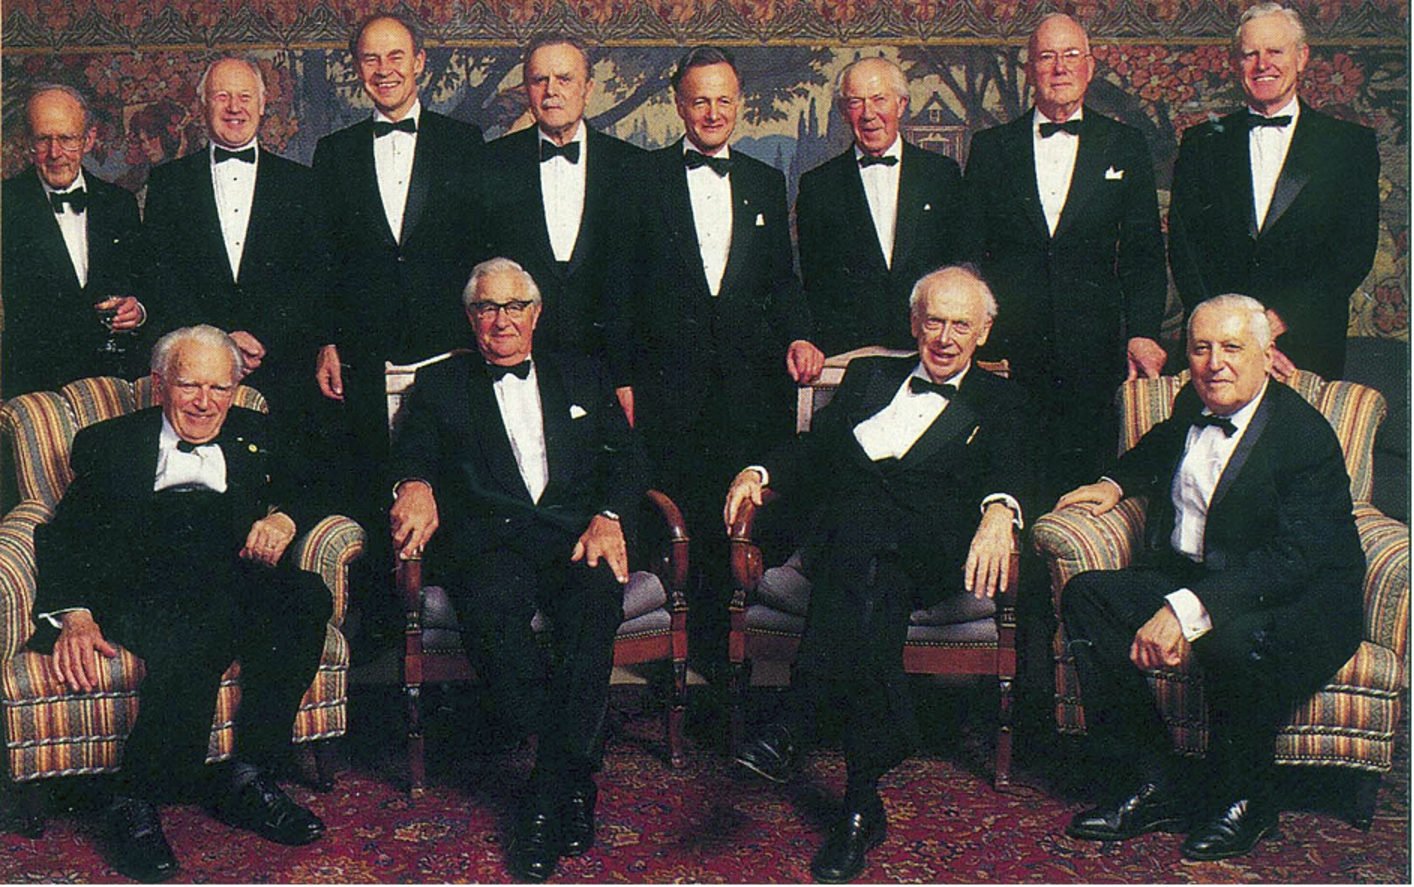 A celebration of Minds. Seated, from left to right: Gerhard Herzberg (Canada, Chemistry, 1971), George Porter (UK, Chemistry, 1967), James Watson (US, Medicine, 1962), Ilya Prigogine (Belgium, Chemistry, 1977). Standing, from left to right: Max Perutz (UK, Chemistry, 1962), Michael Smith (Canada, Chemistry, 1993), Dudley Herschbach (US, Chemistry, 1986), Bertram Brockhouse (Canada, Physics, 1994), John Polanyi (Canada, Chemistry, 1986), Christian de Duve (Belgium, Medicine, 1974), Charles Townes (US, Physics, 1964), Henry Kendall (US, Physics, 1990) (personal photograph). (Colors are visible in the online version of the article; http://dx.doi.org/10.3233/BSI-150118.)